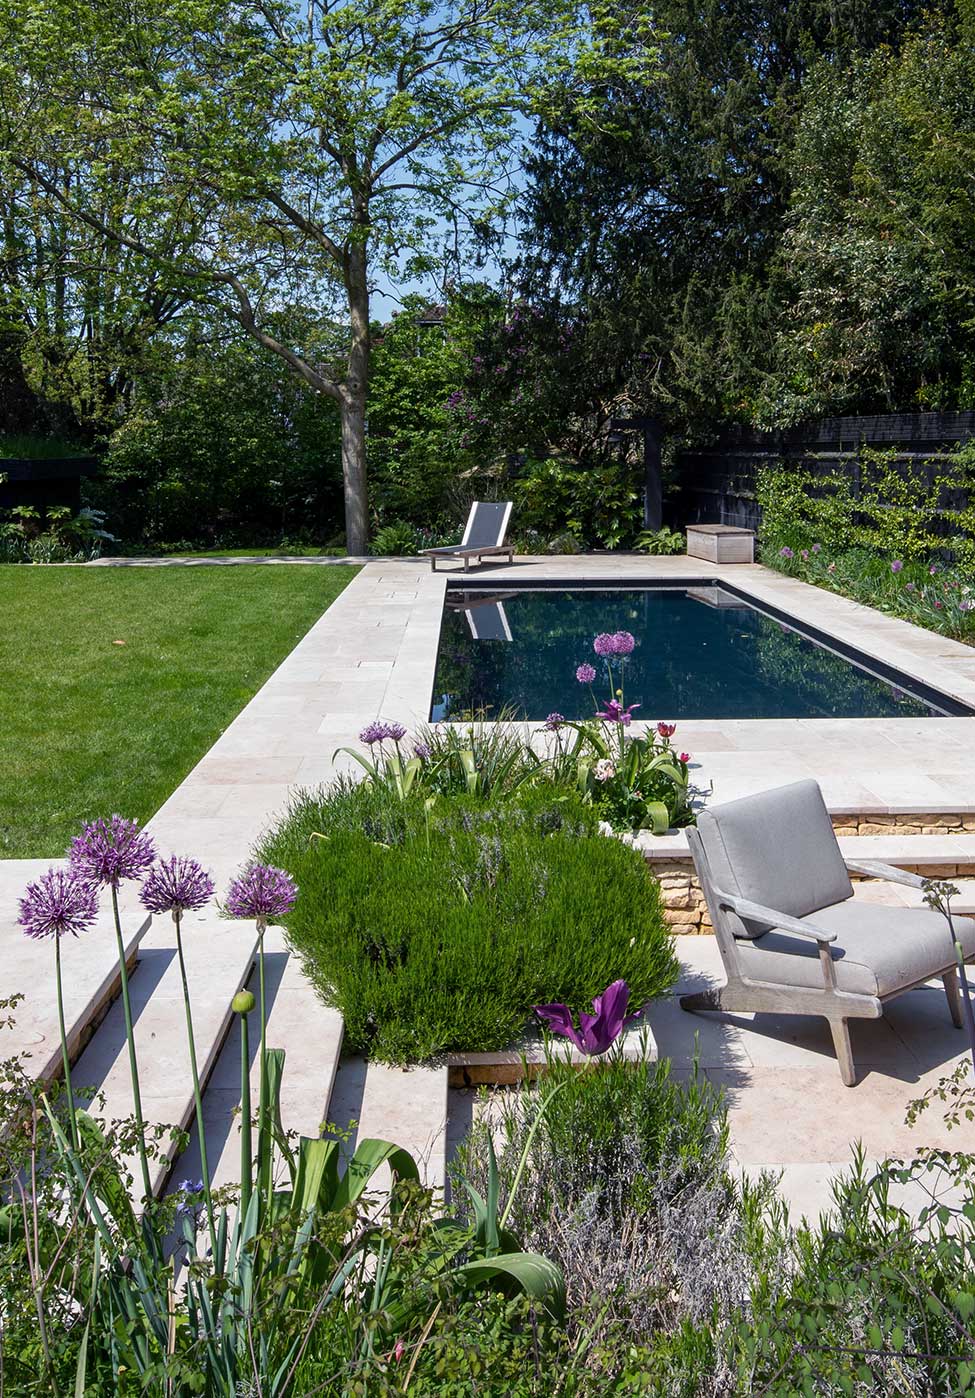 Outdoor pool in a well kept garden with flowers